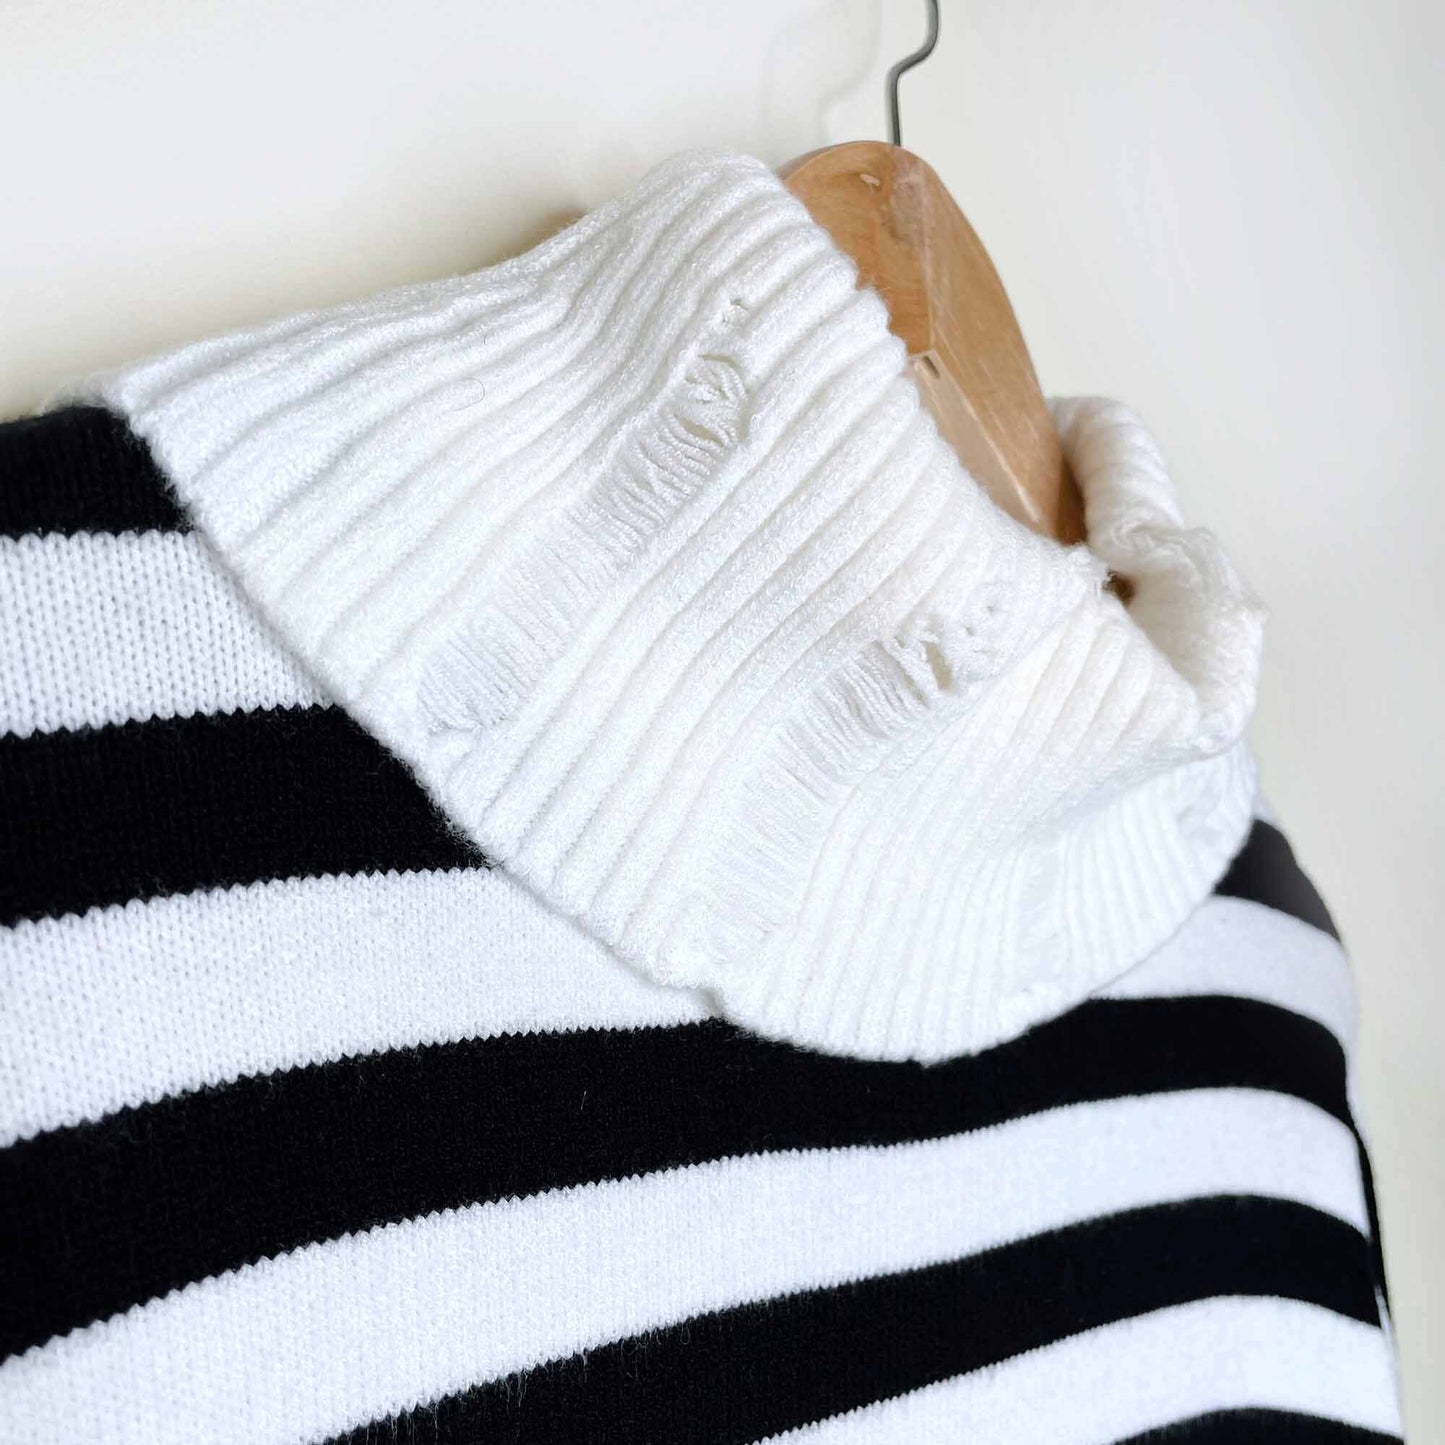 elana wang cozy striped distressed turtleneck sweater - size small